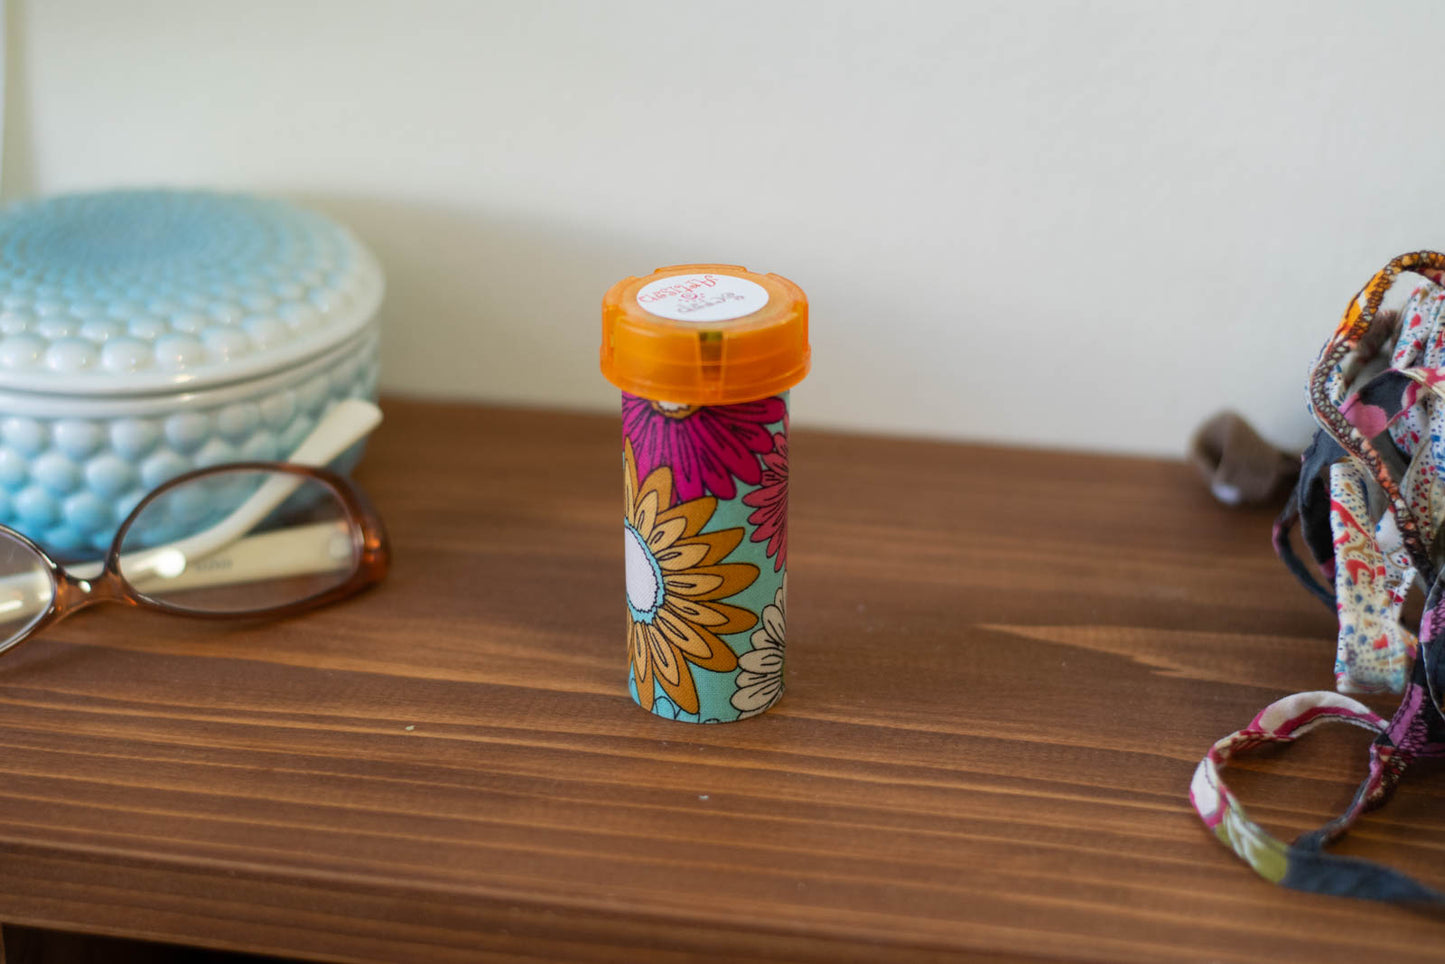 Upcycled Prescription Bottle Sewing Kit — Pink, Ochre and White Flowers on Light Blue, 3.5" high, closed